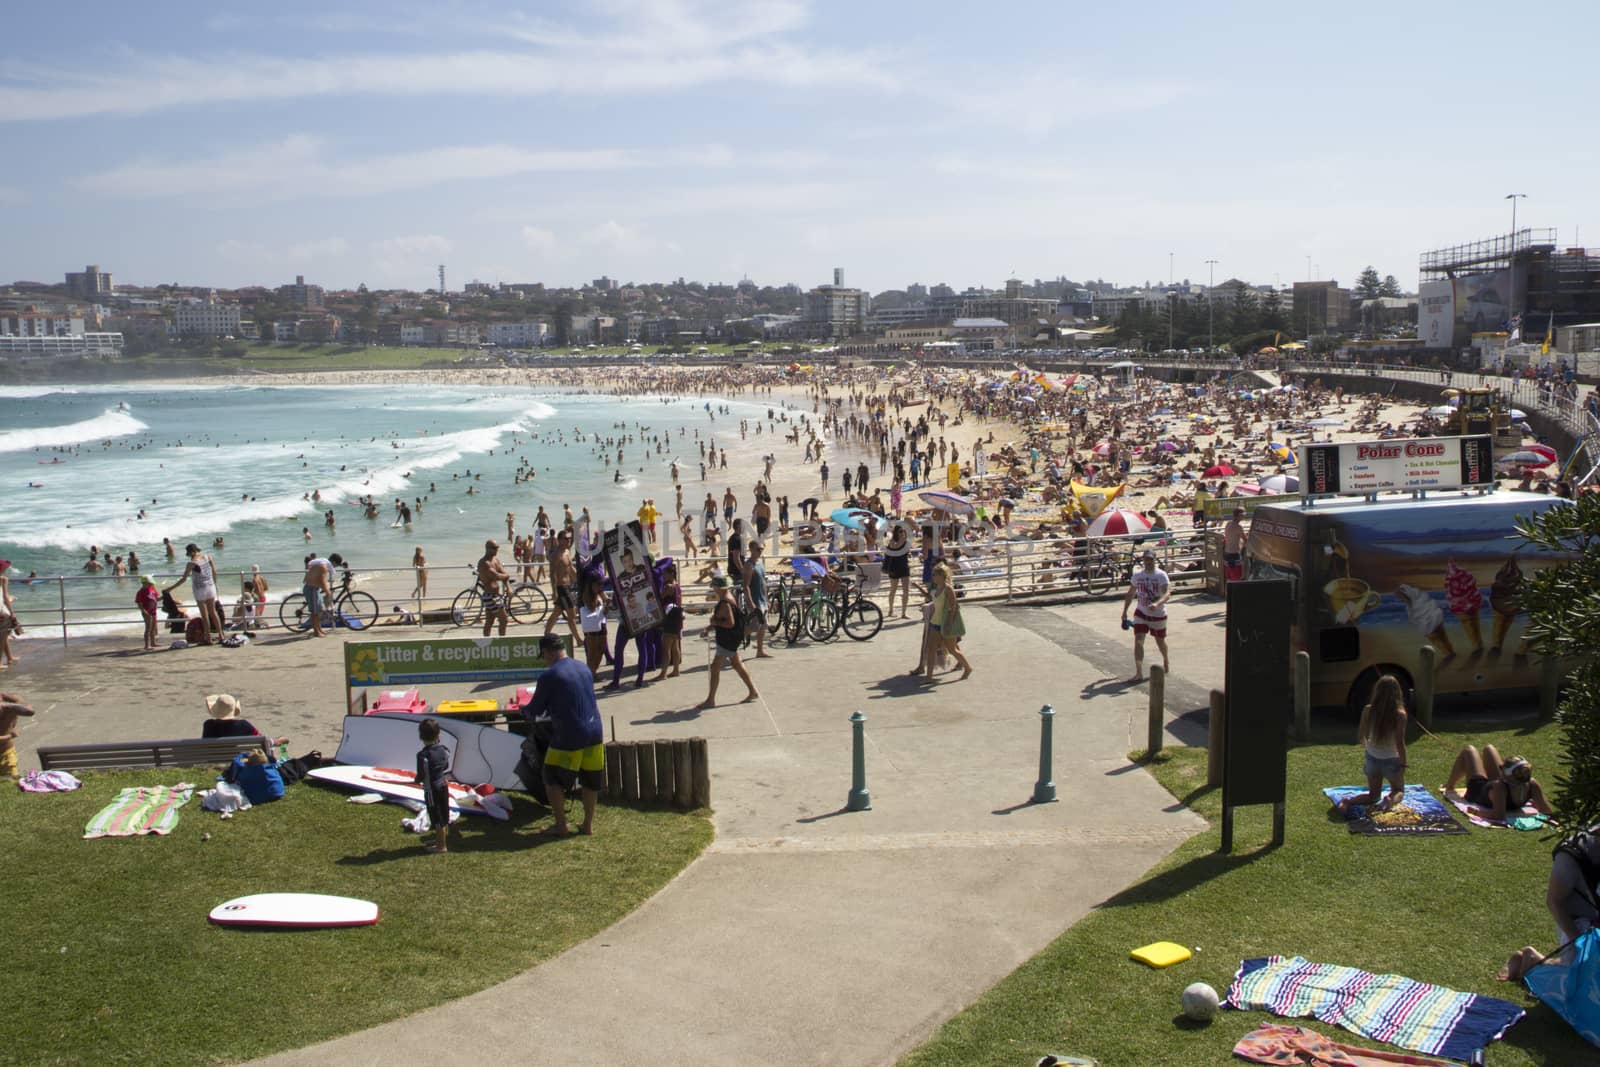 Sydney, Australia-March 16th 2013: Bondi Beach viewed from the north on a busy holiday weekend. The beach is one of Australia's most famous and is listed in the Australian National Heritage List.